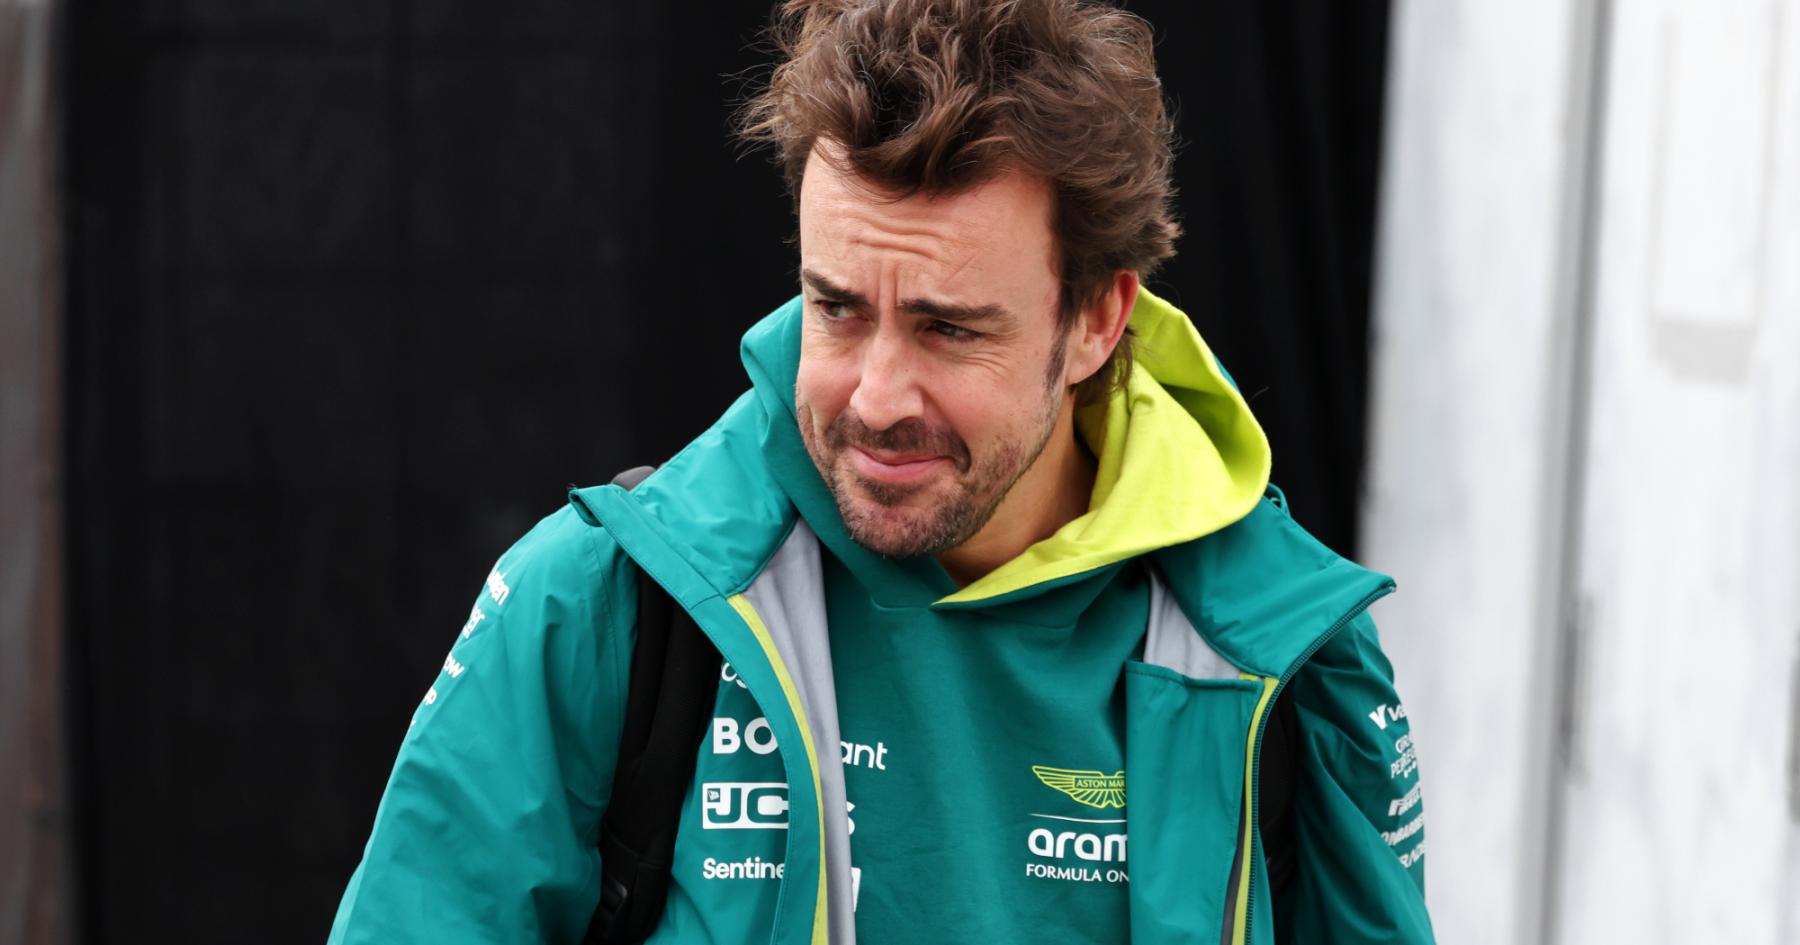 Exclusive: Inside Alonso's Strategic Talks with F1 Rivals Prior to Signing New Contract